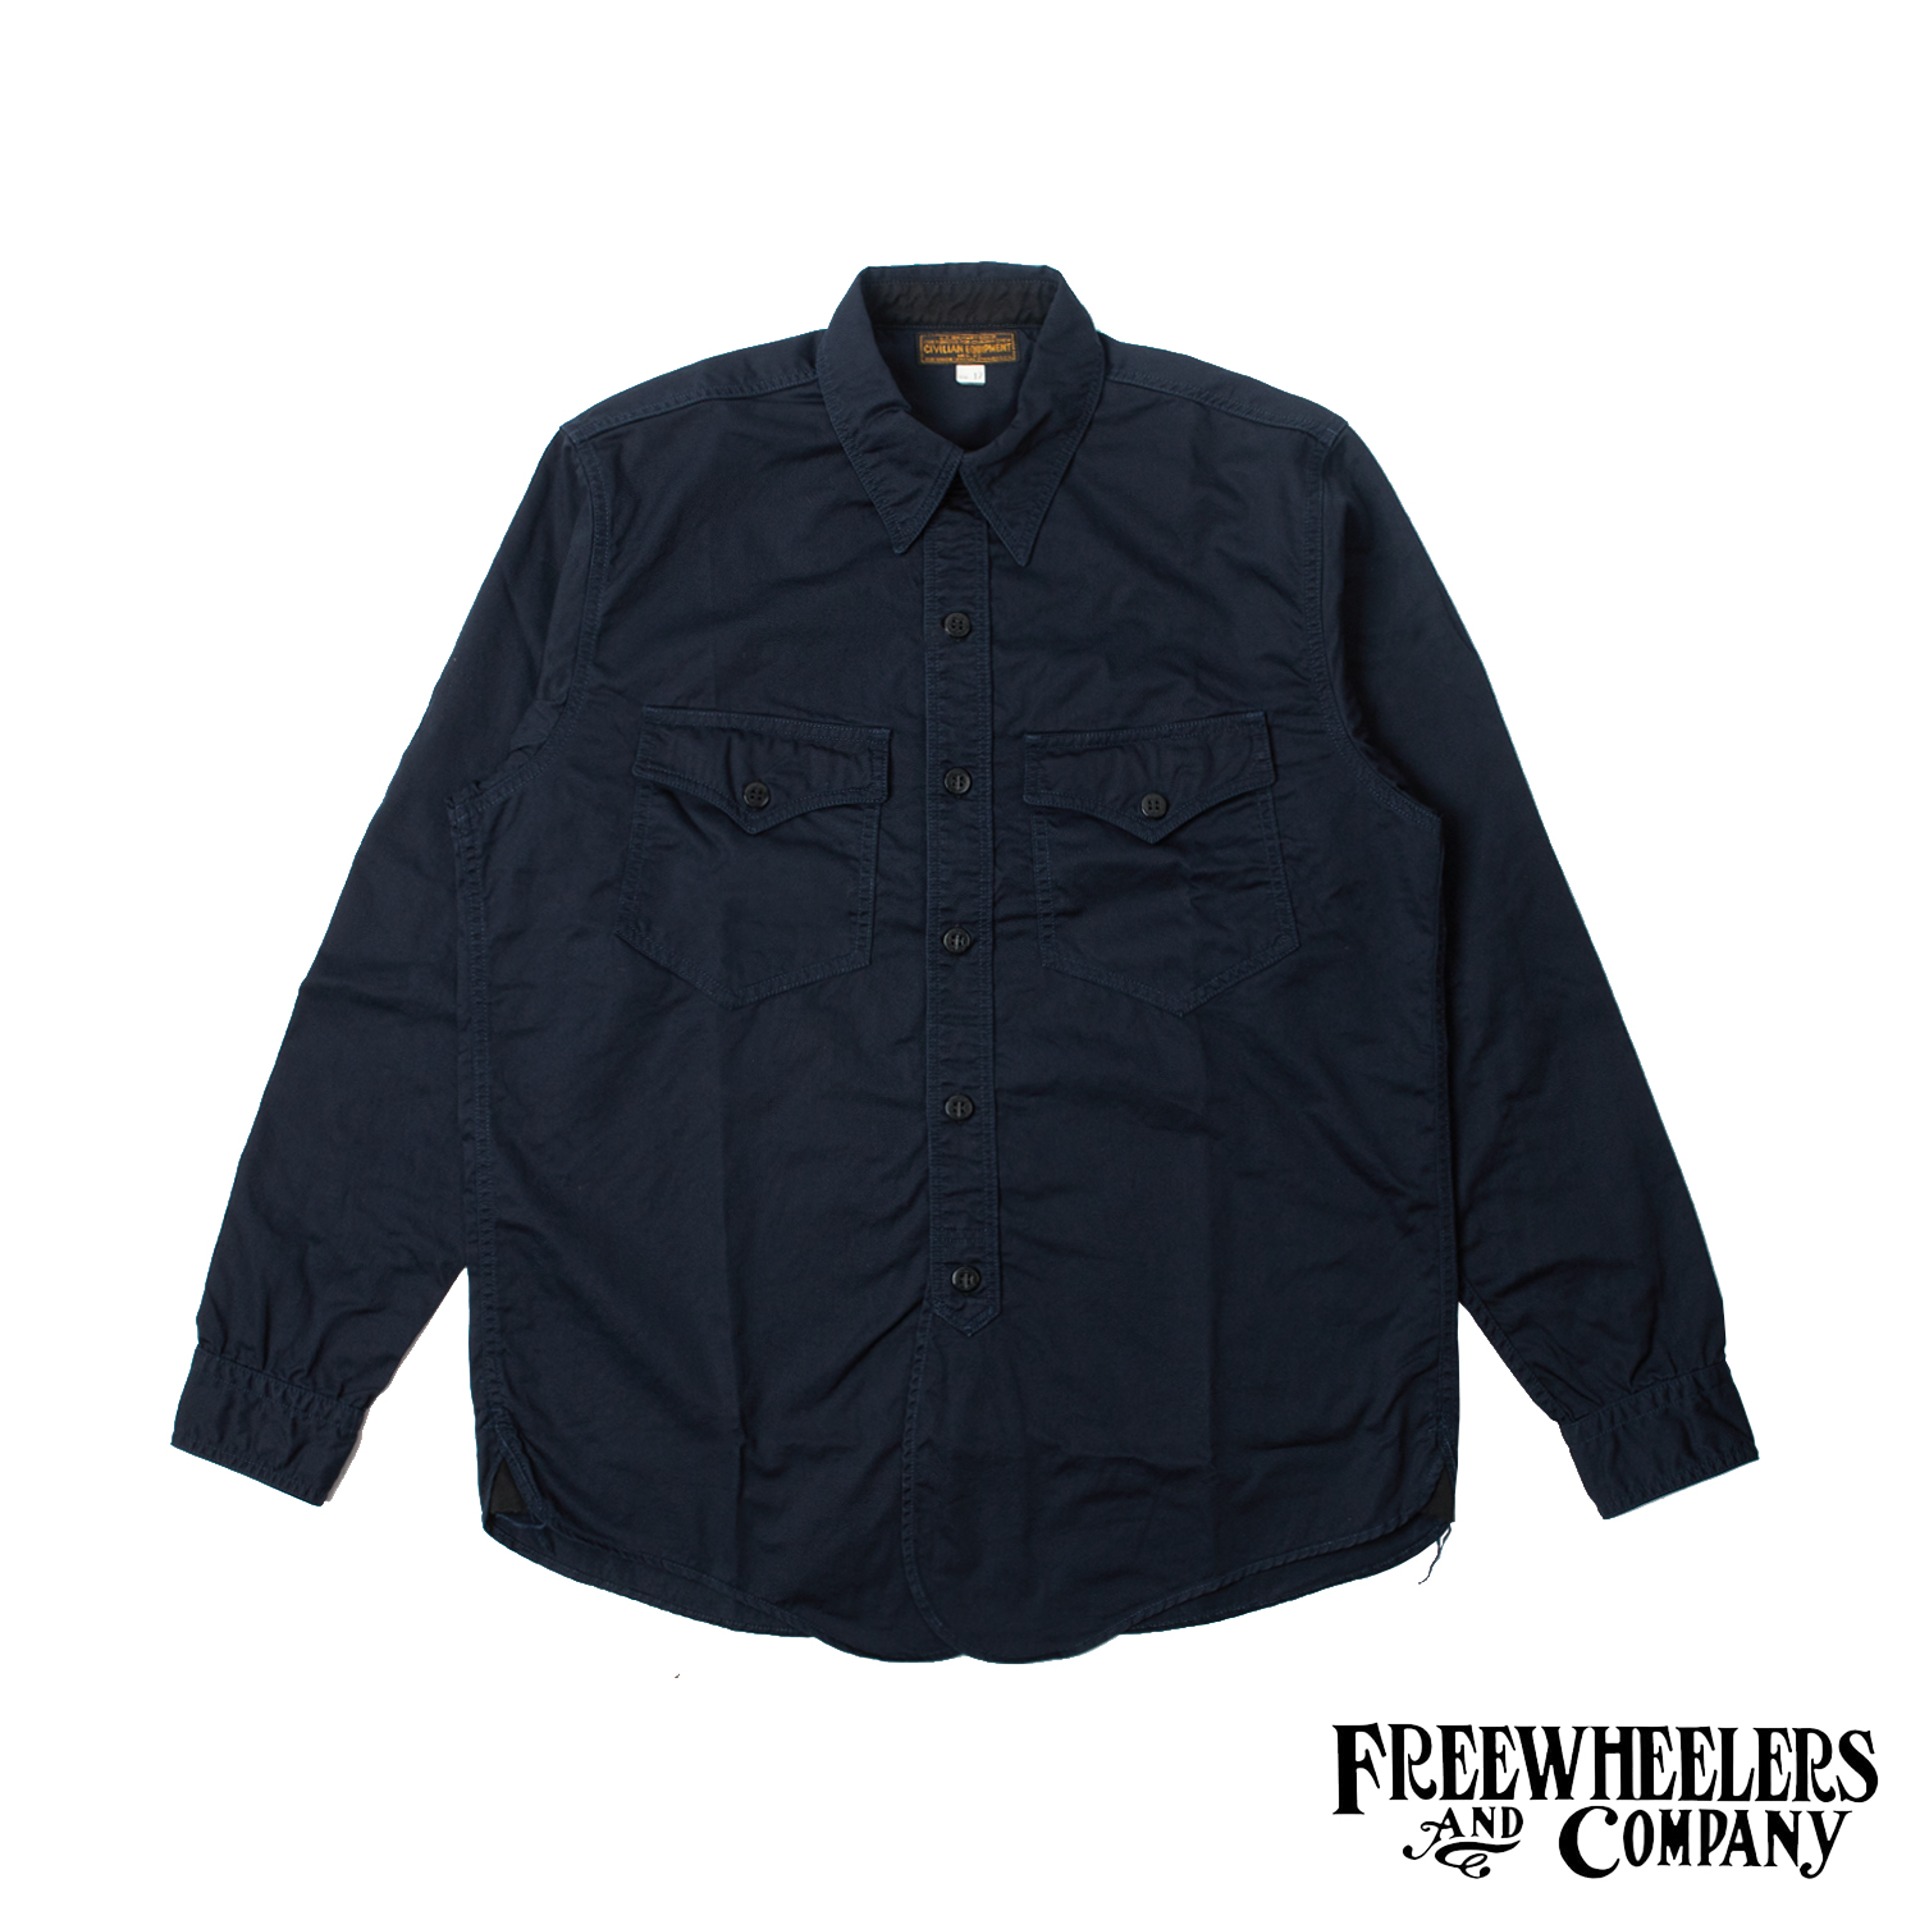 [Union Special Overalls] 1910~1920s USNAVY STYLE UTILITY CLOTHING  “U.S. NAVY OFFICER SHIRT” (Navy)